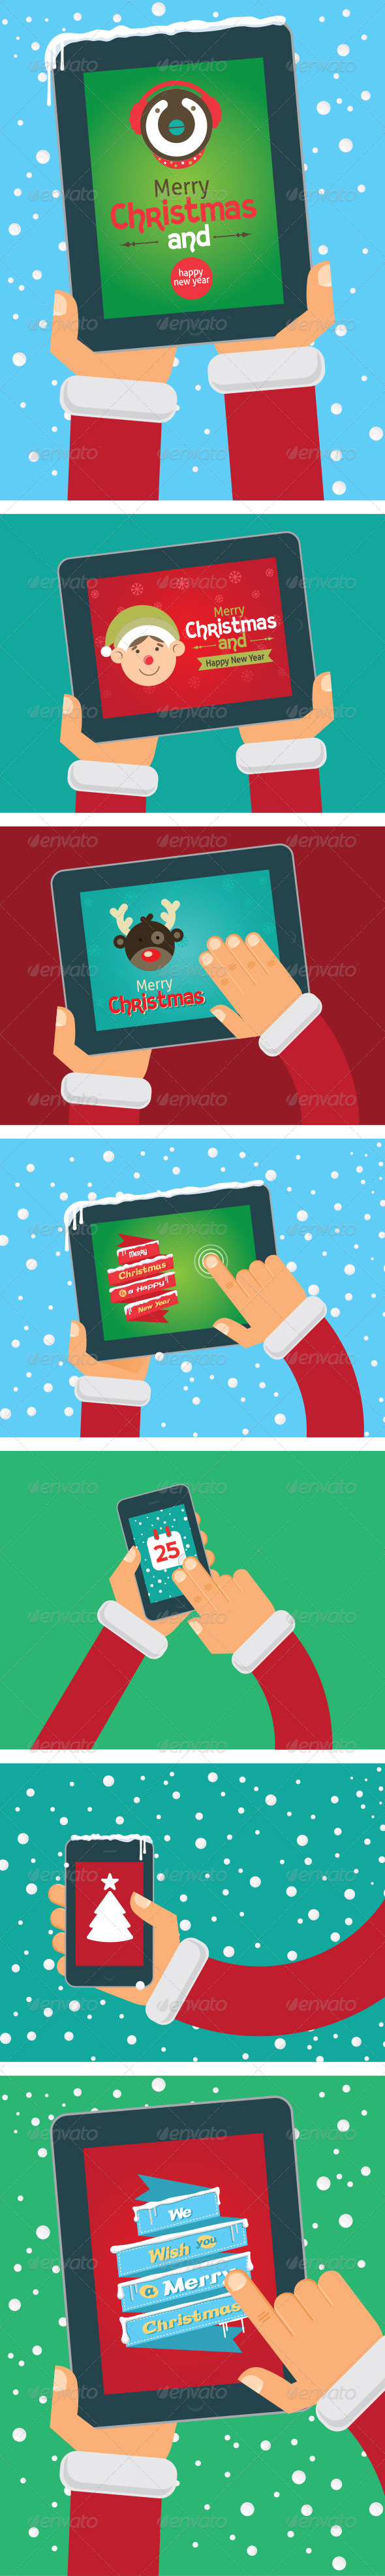 Vector Christmas Cards on Tablet and Phone